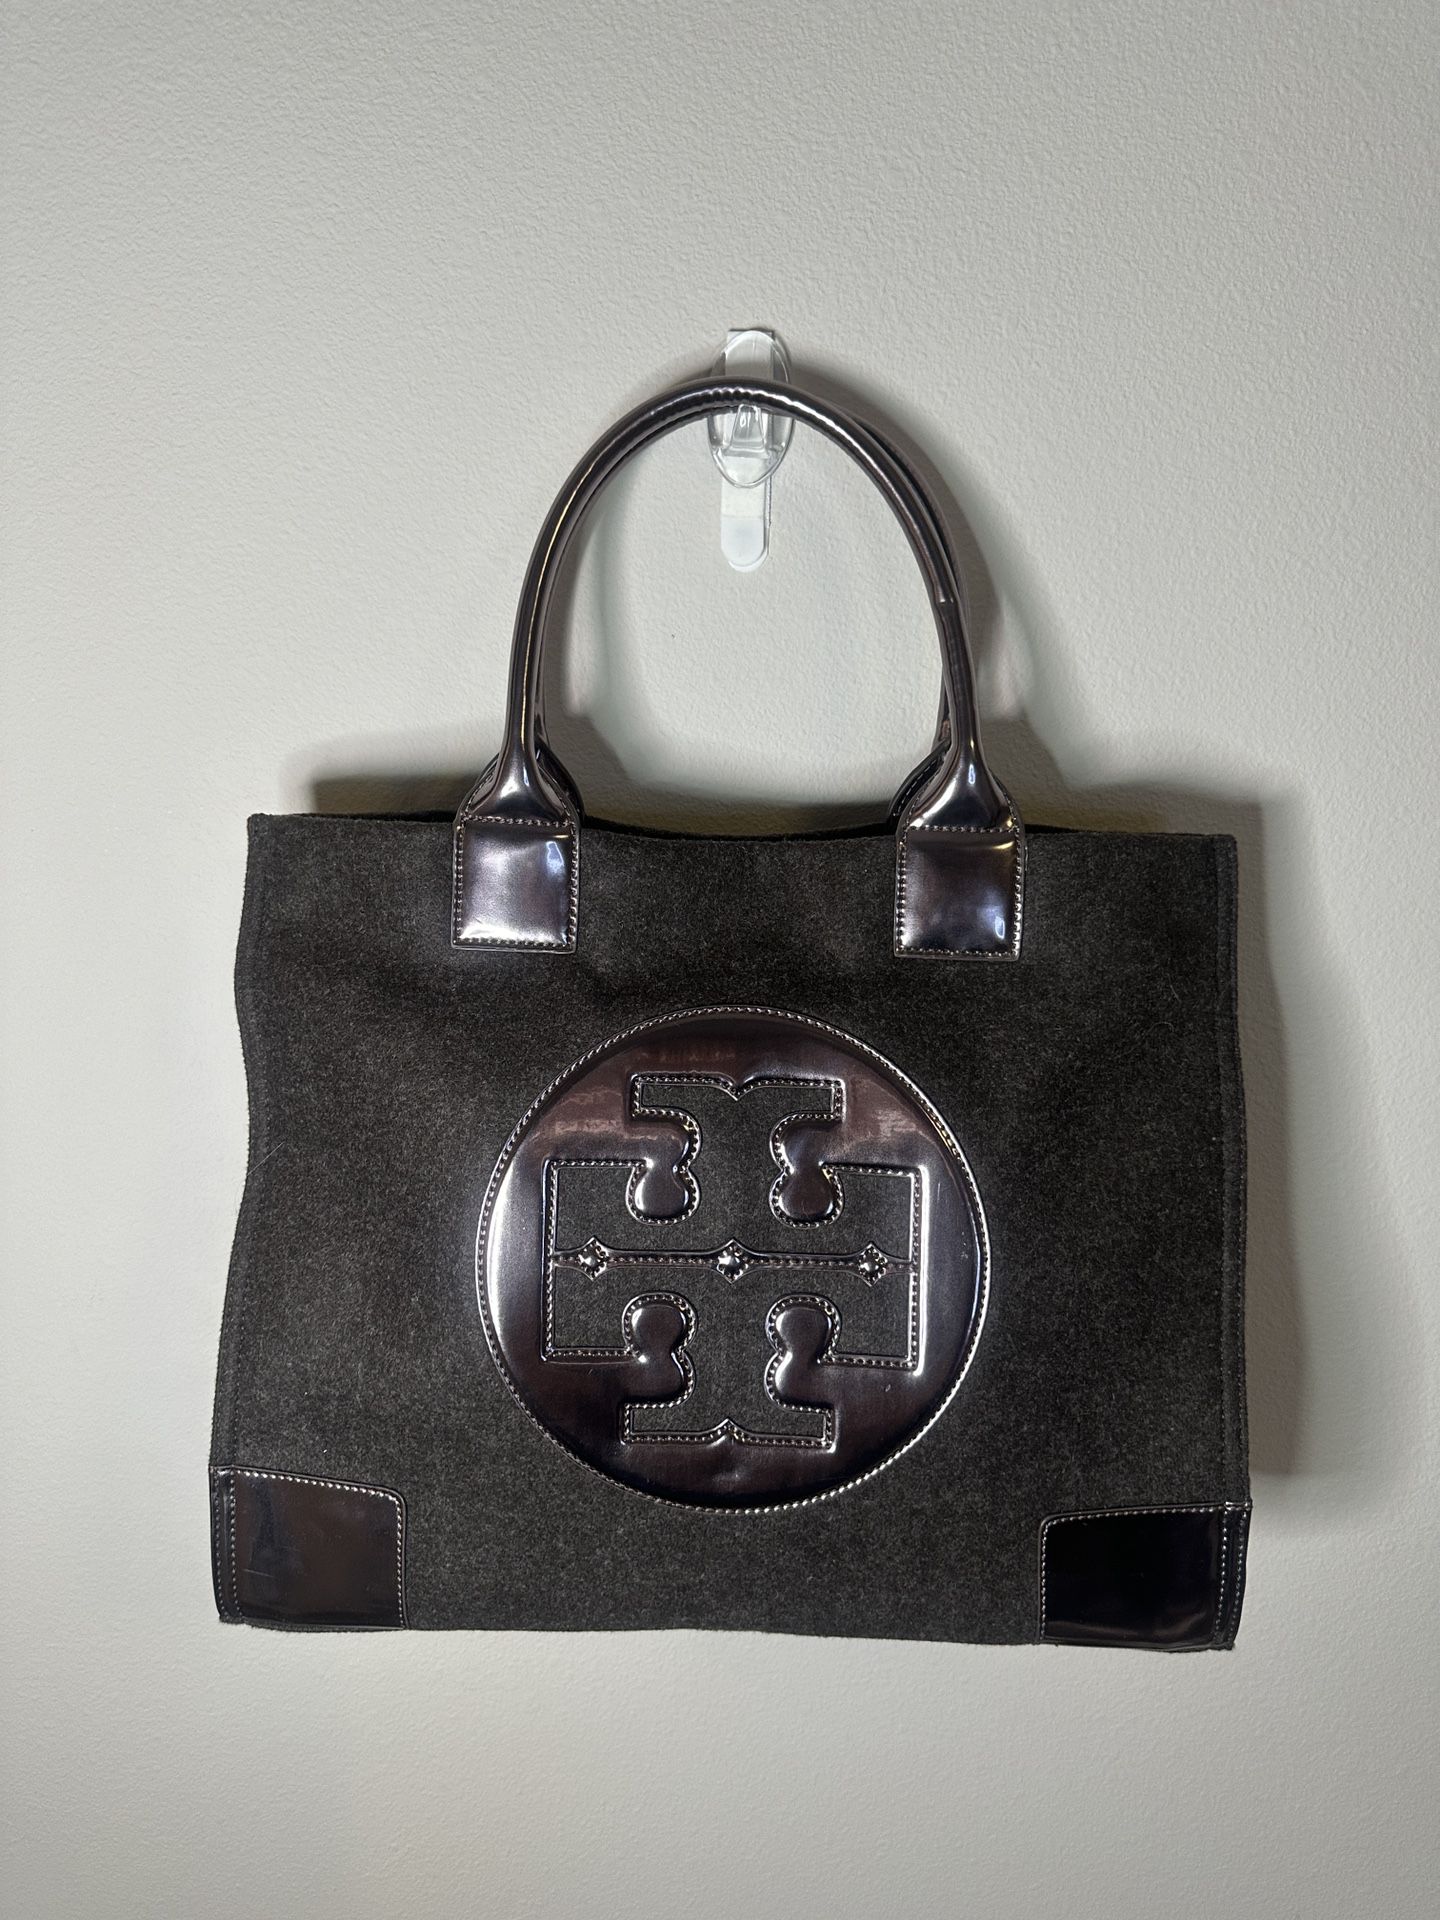 New Without Tags Tory Burch Gray Flannel And Silver Tote Bag